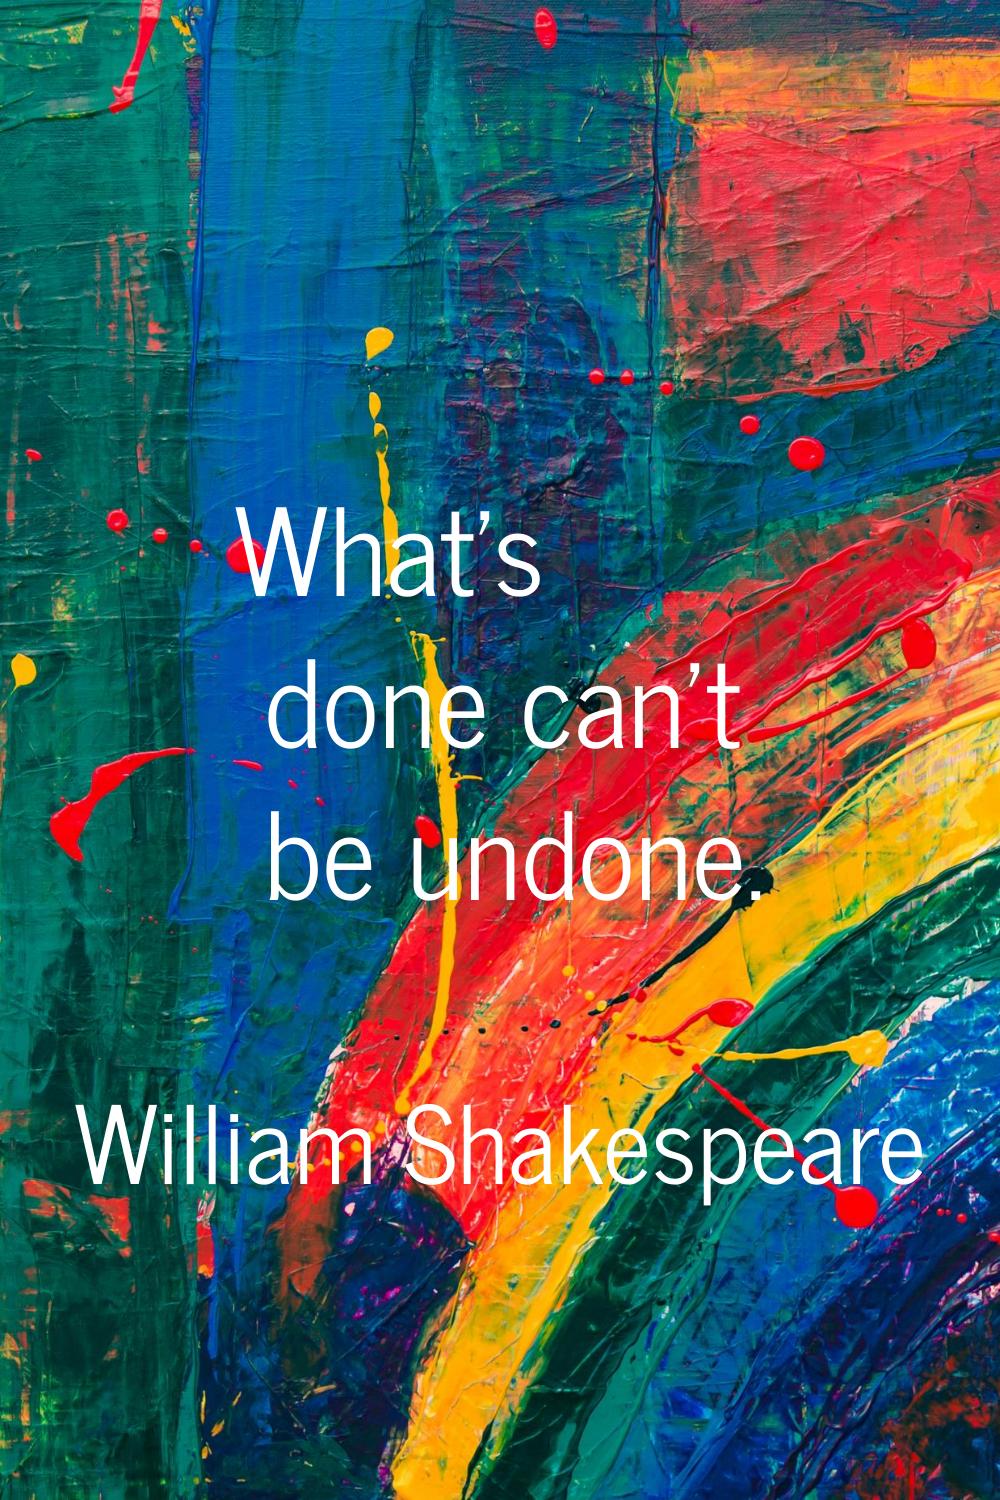 What's done can't be undone.